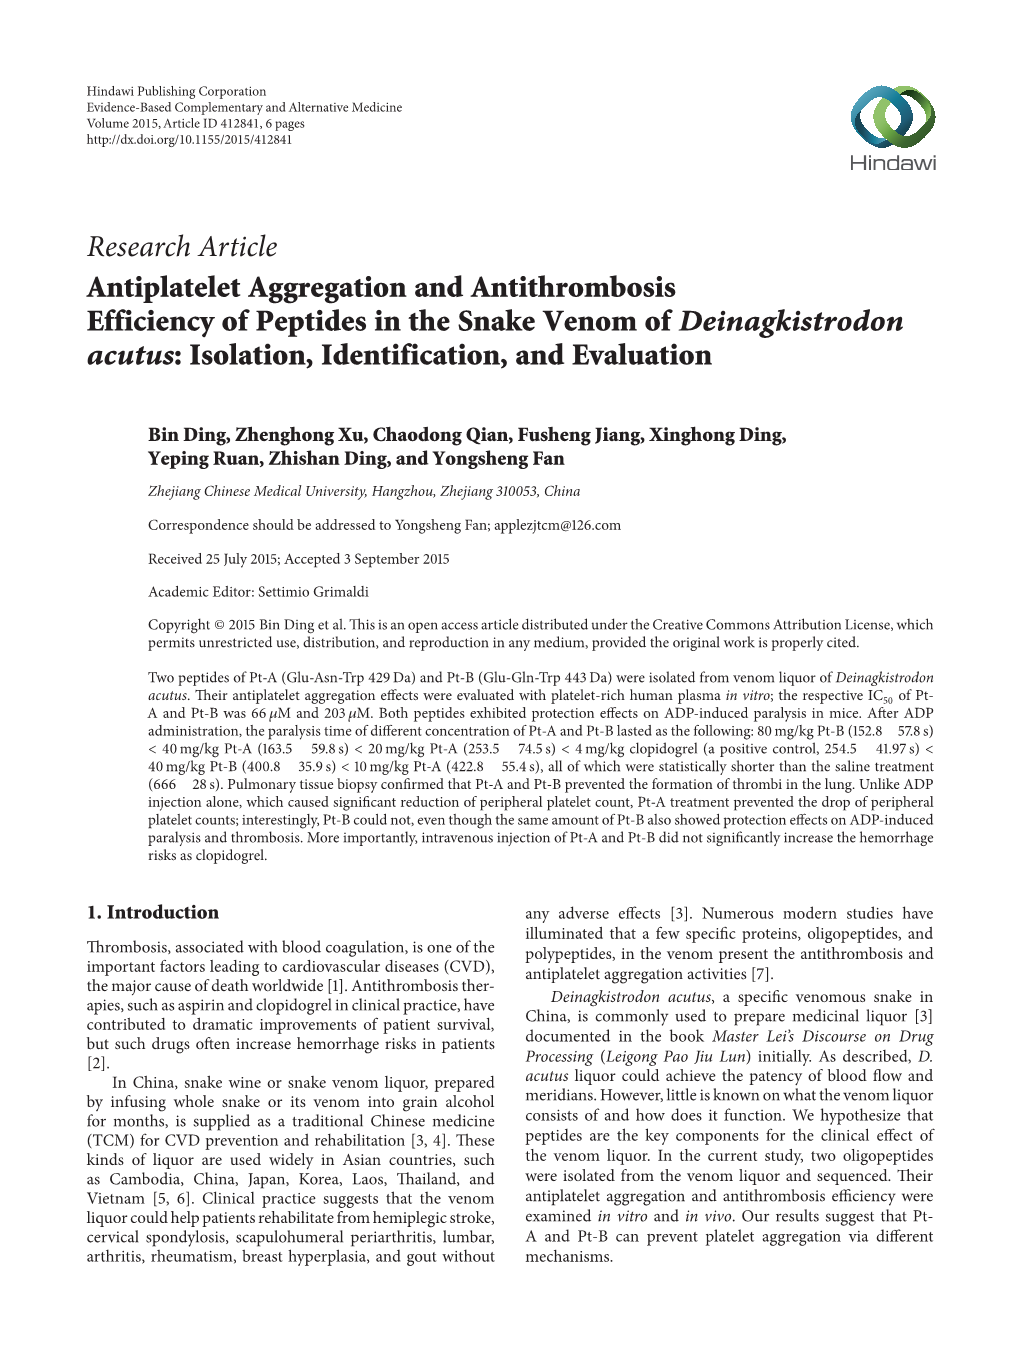 Antiplatelet Aggregation and Antithrombosis Efficiency of Peptides in the Snake Venom of Deinagkistrodon Acutus: Isolation, Identification, and Evaluation